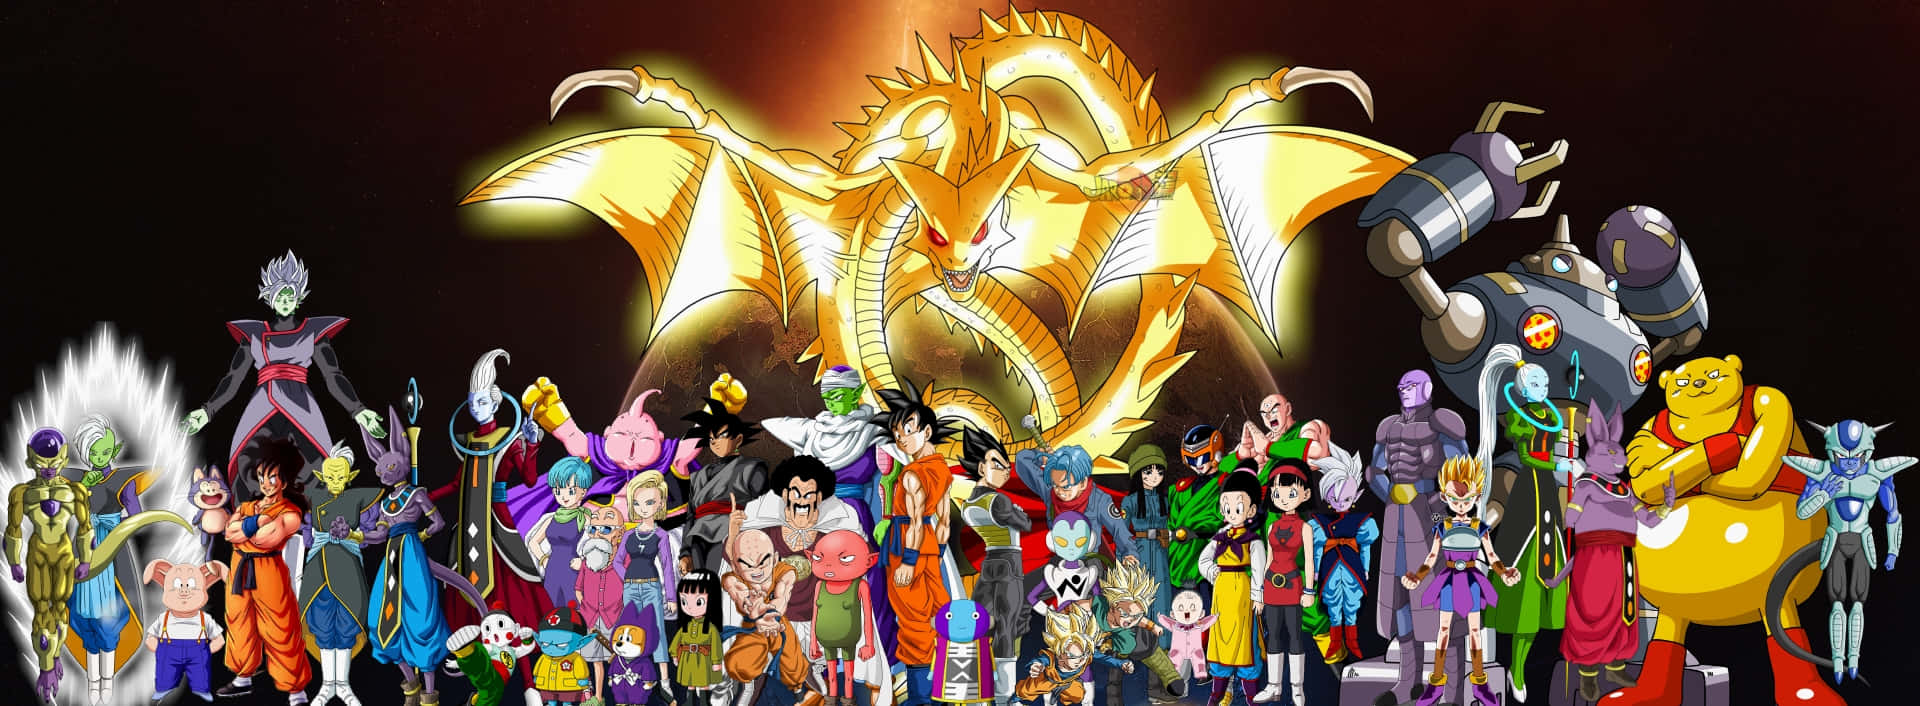 Dragon Ball Super: The Mighty Warriors of Universe 6 Wallpaper